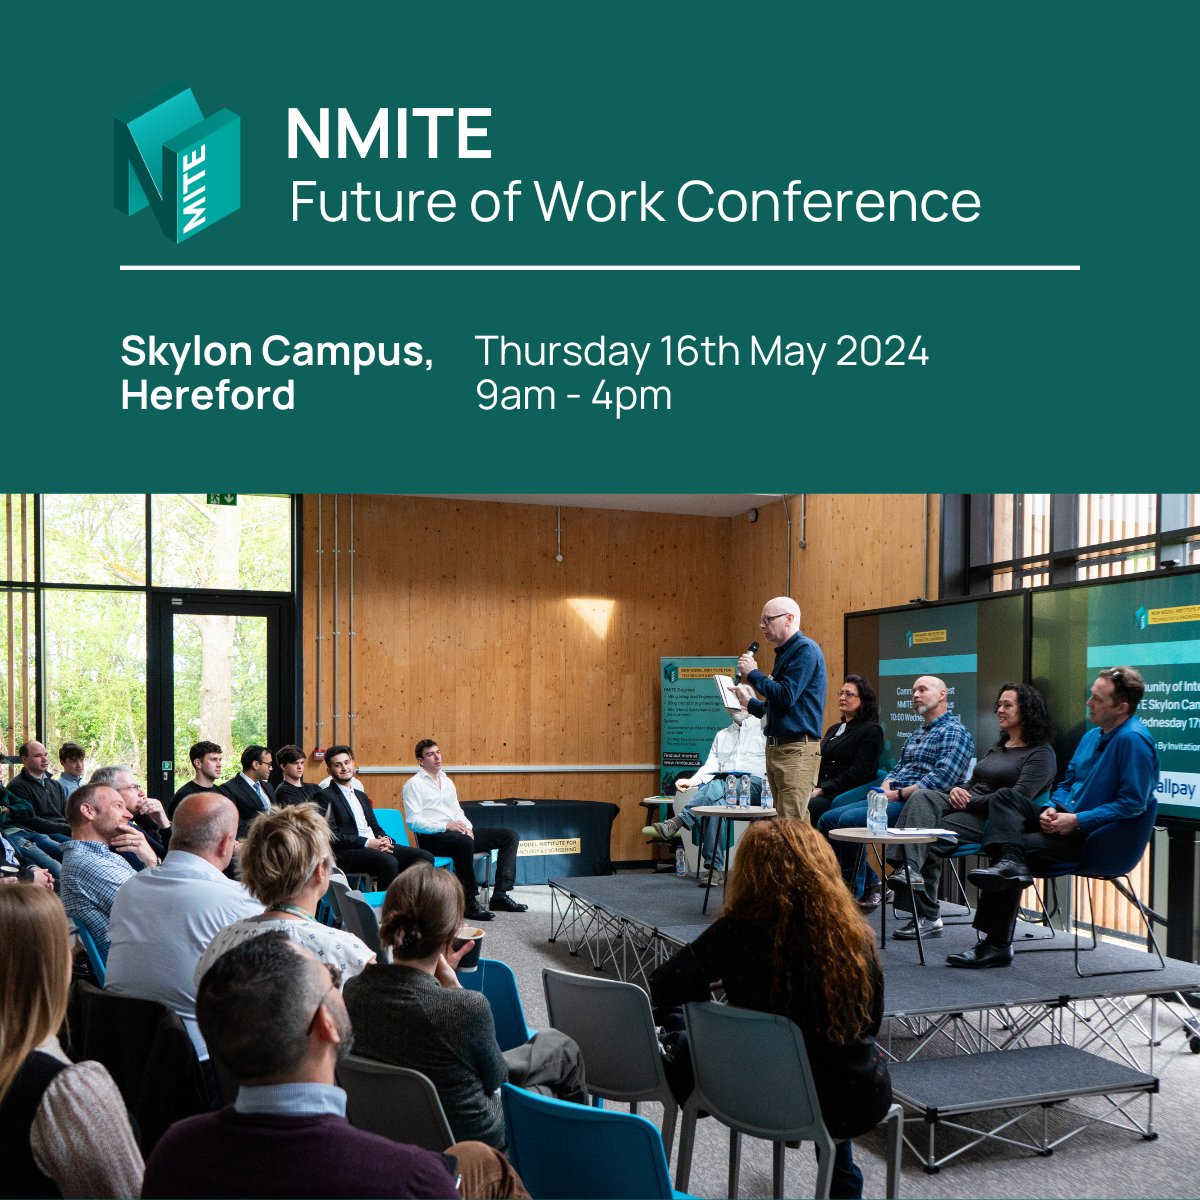 Just 3 weeks to our conference! Explore tech's impact on work and future skills with top speakers. 🗓️16 May, Skylon Campus, Hereford, 9-4. Don’t miss out! Swipe ➡ to meet a few of the incredible speakers! #FutureOfWork #Innovation